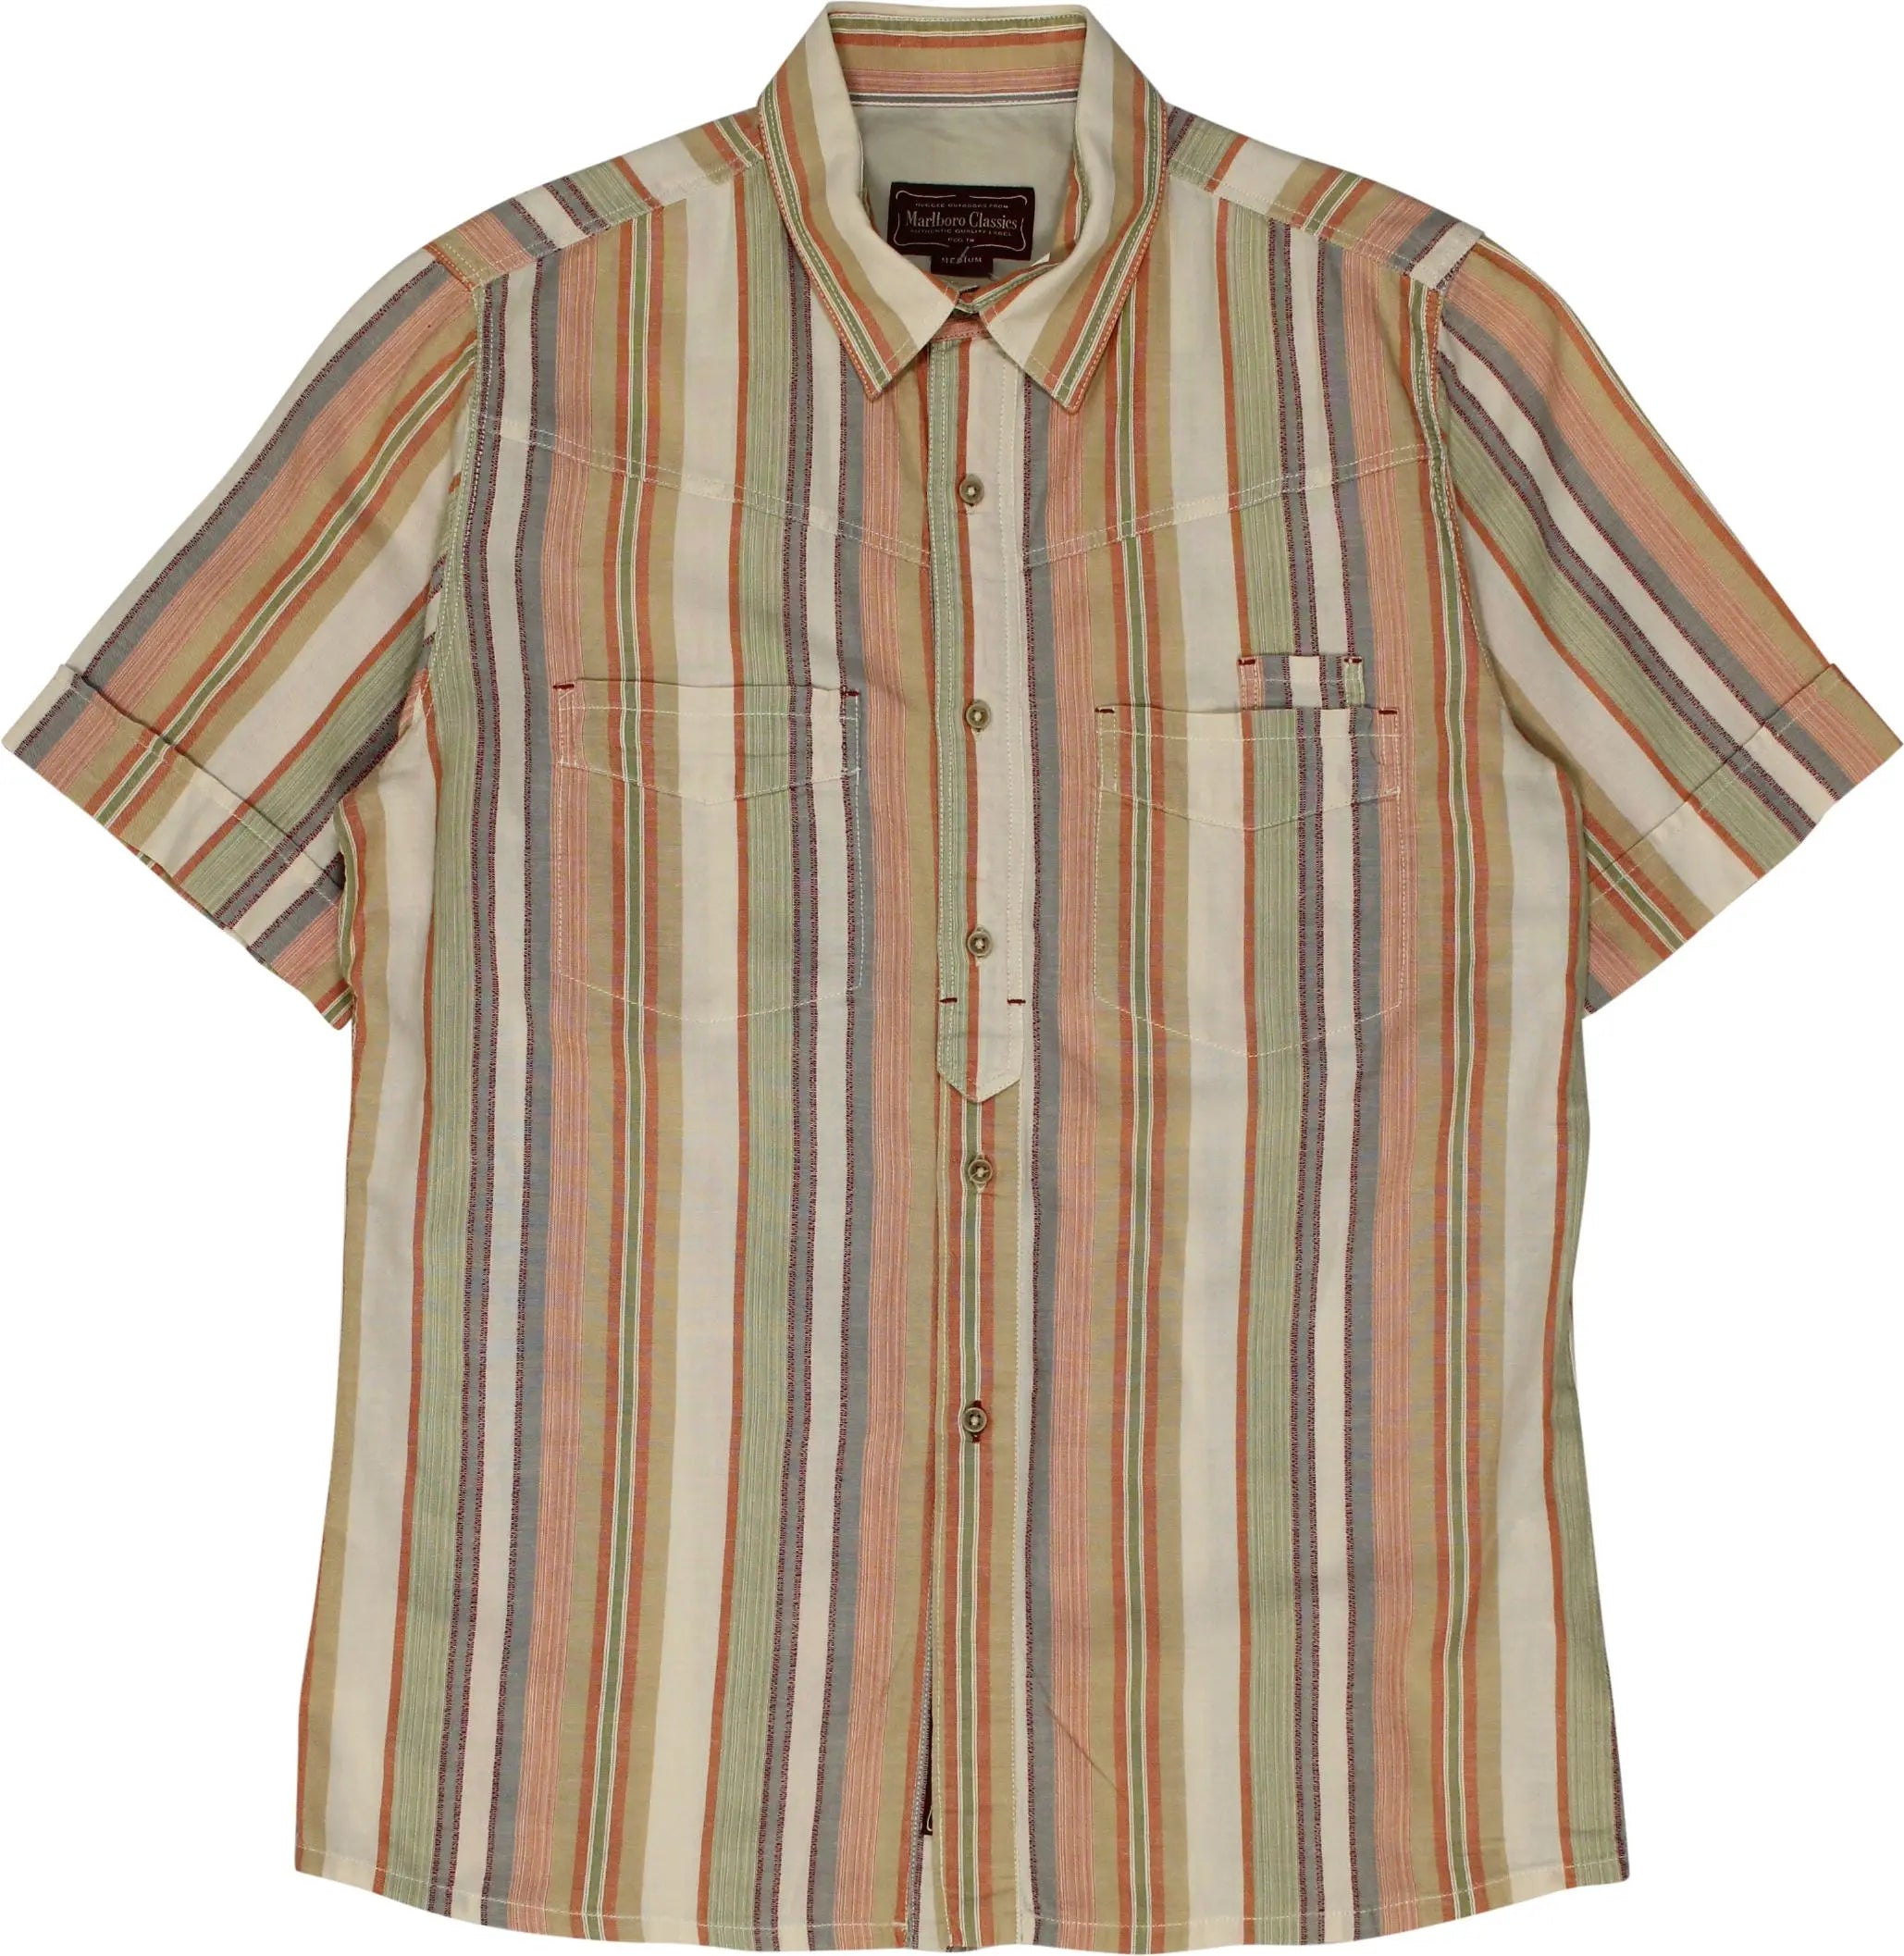 Marlboro Classics - Striped Shirt- ThriftTale.com - Vintage and second handclothing